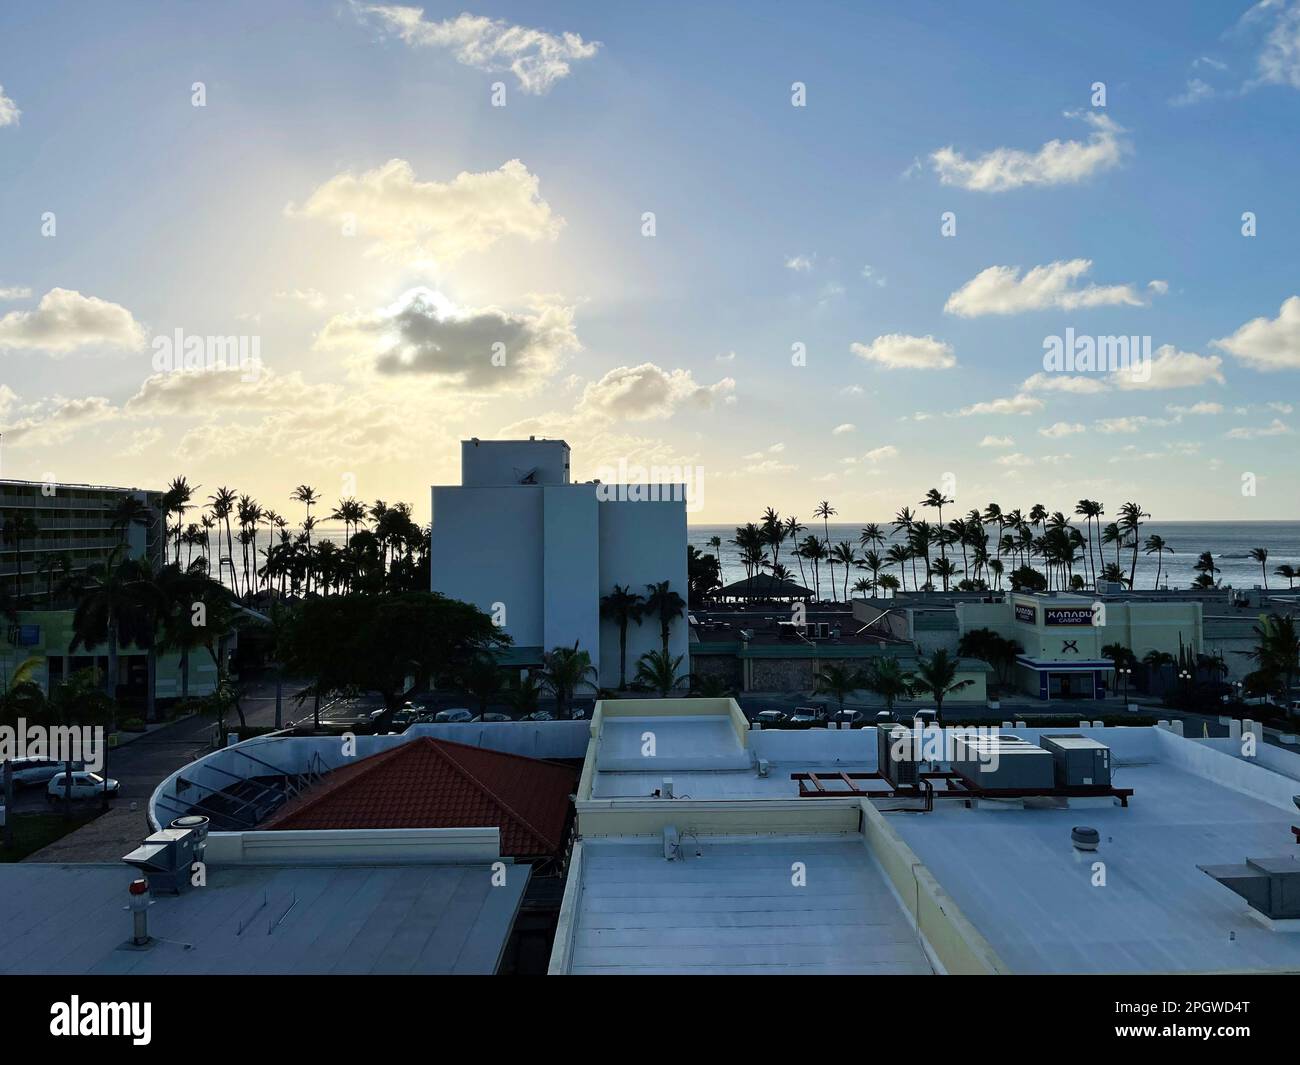 Eagle Beach, Noord, Aruba - March 9, 2022. View looking out over Noord, from the Vu Rooftop Restaurant, evening. Stock Photo